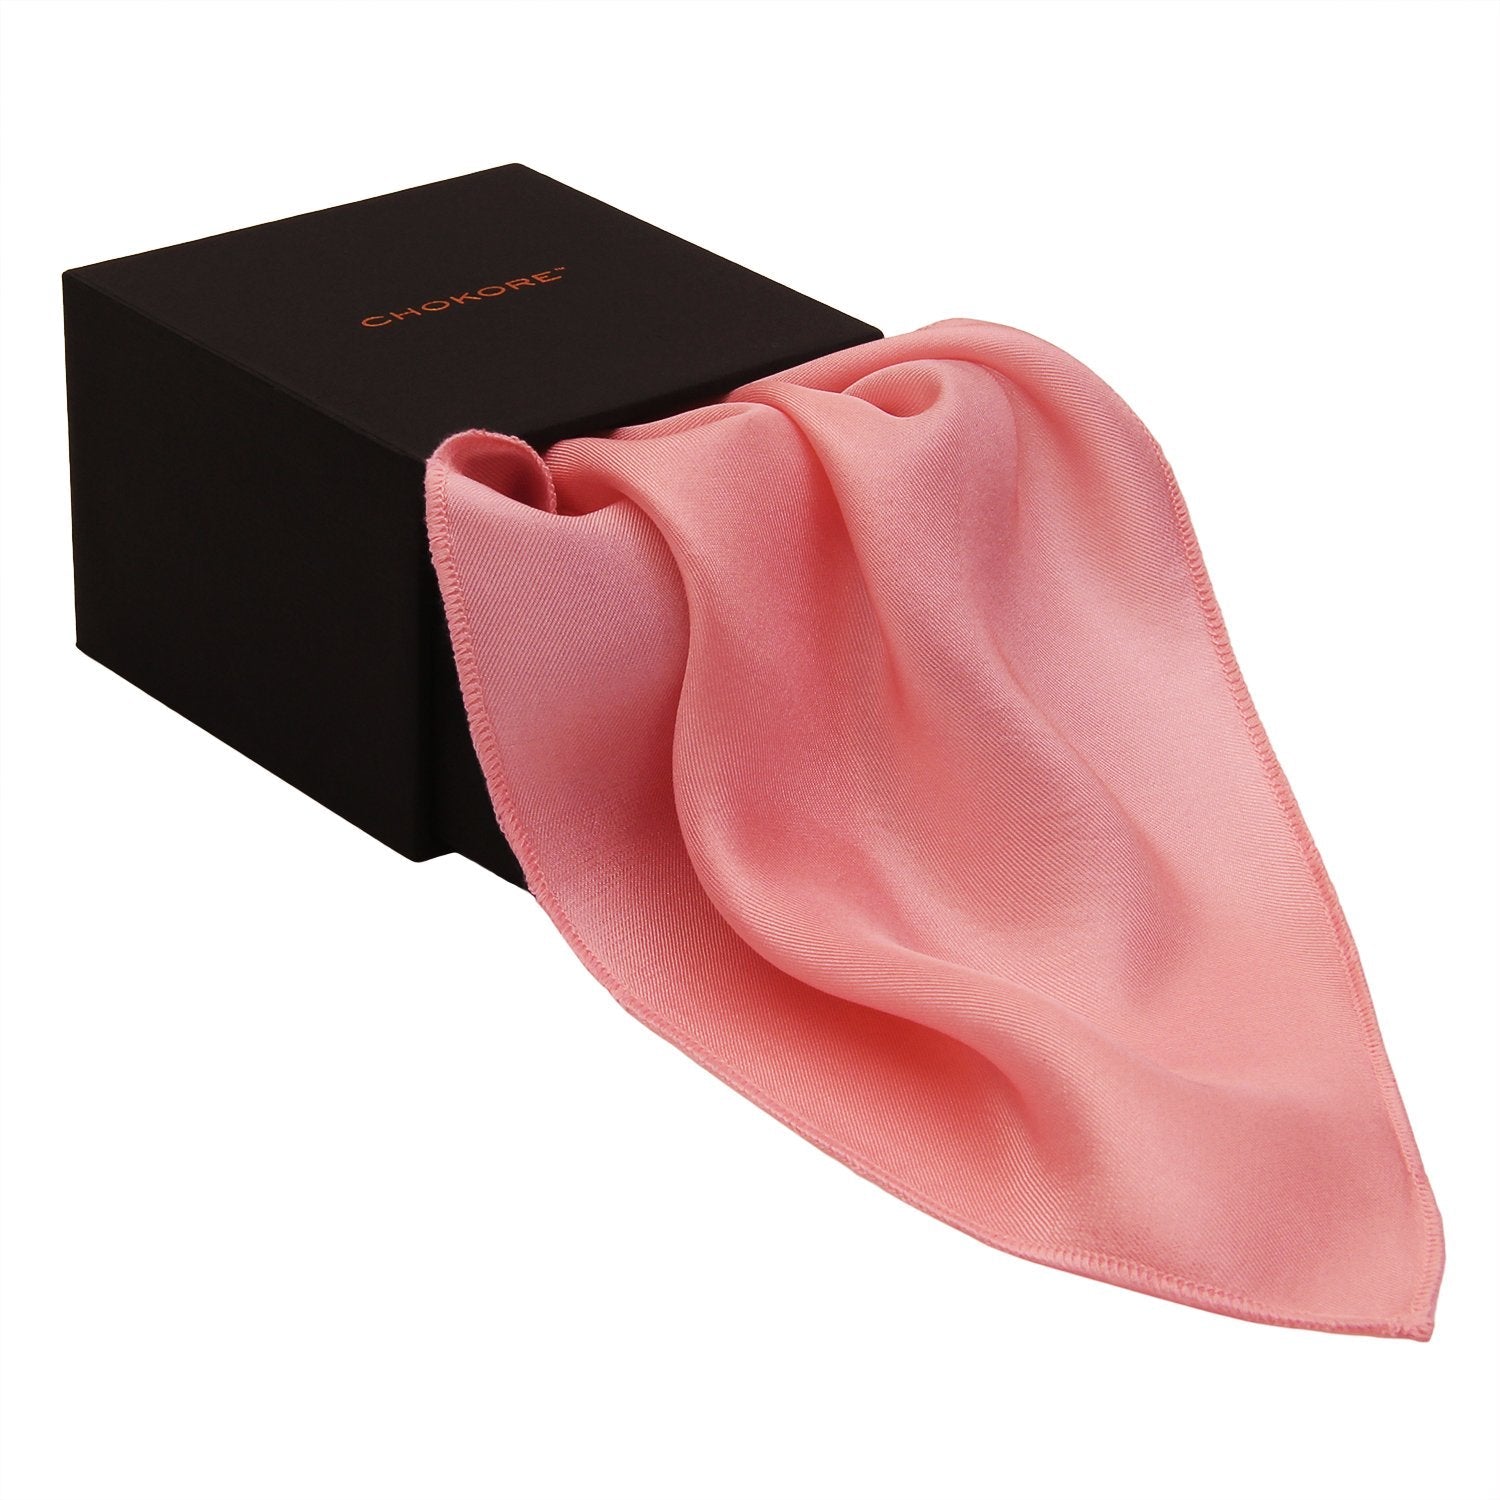 Chokore Flamingo Pink Colour Pure Silk Pocket Square, from the Solids Line